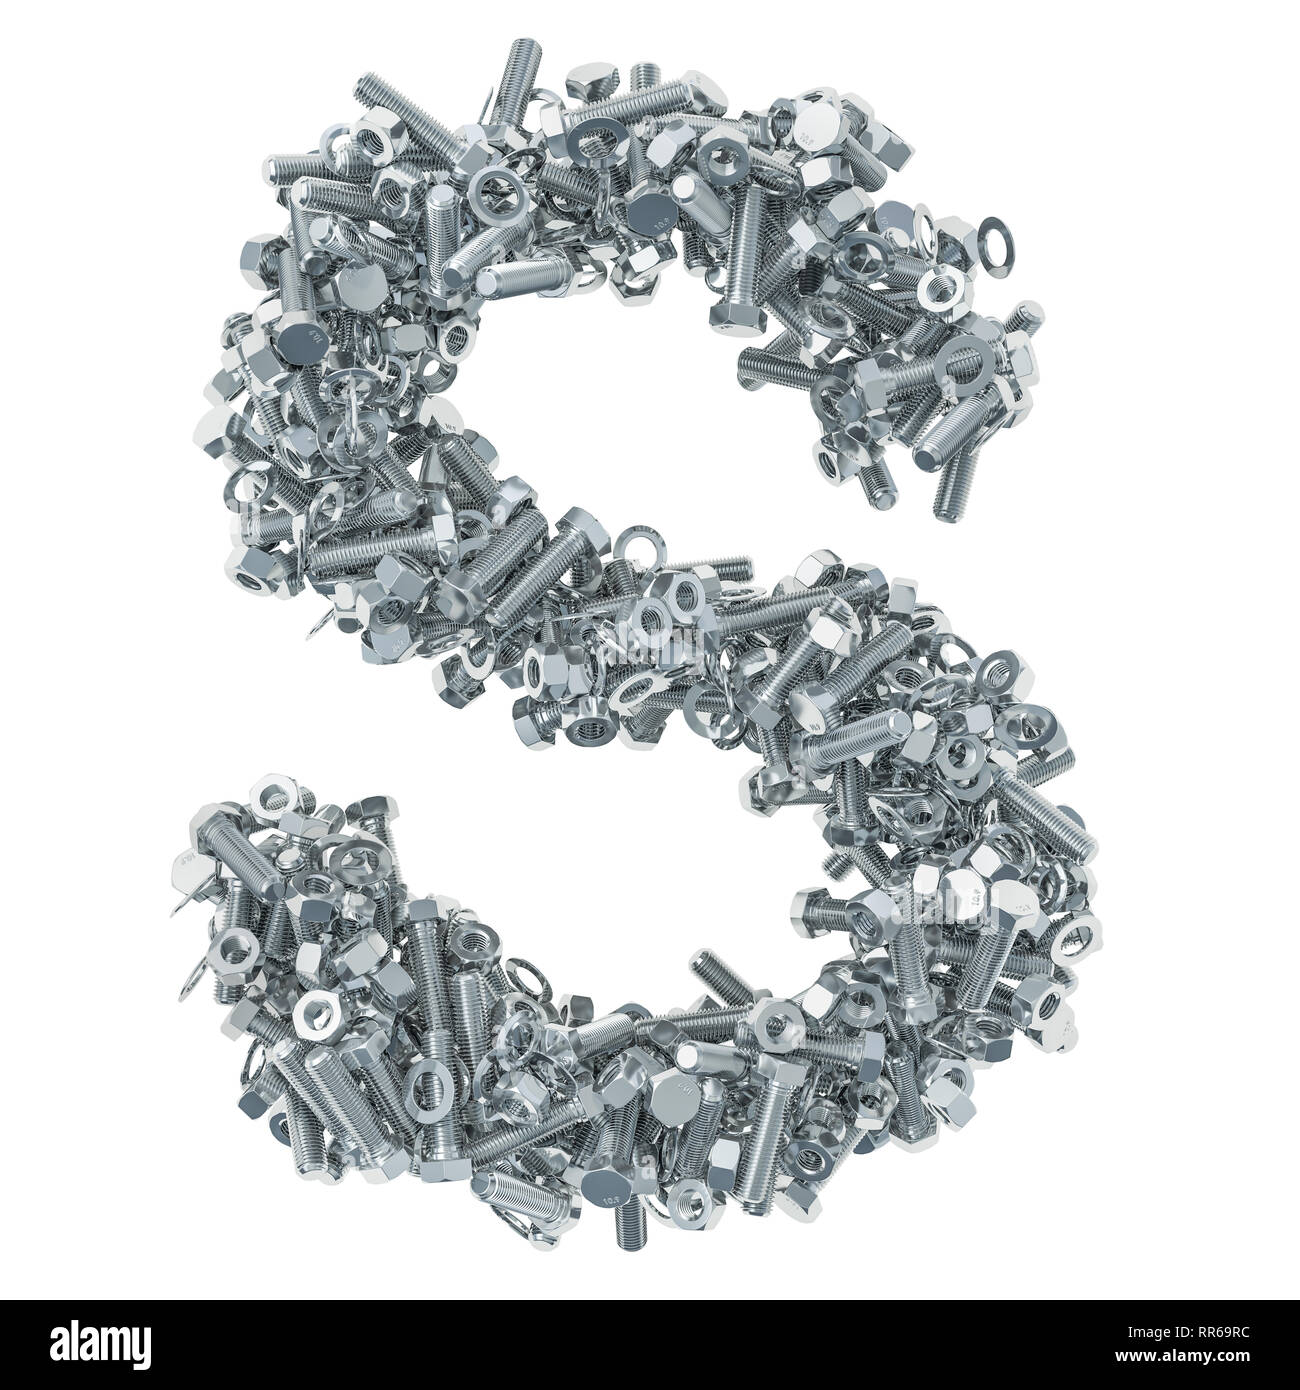 Alphabet letter S from bolts, nuts and washers. 3D rendering isolated on white background Stock Photo